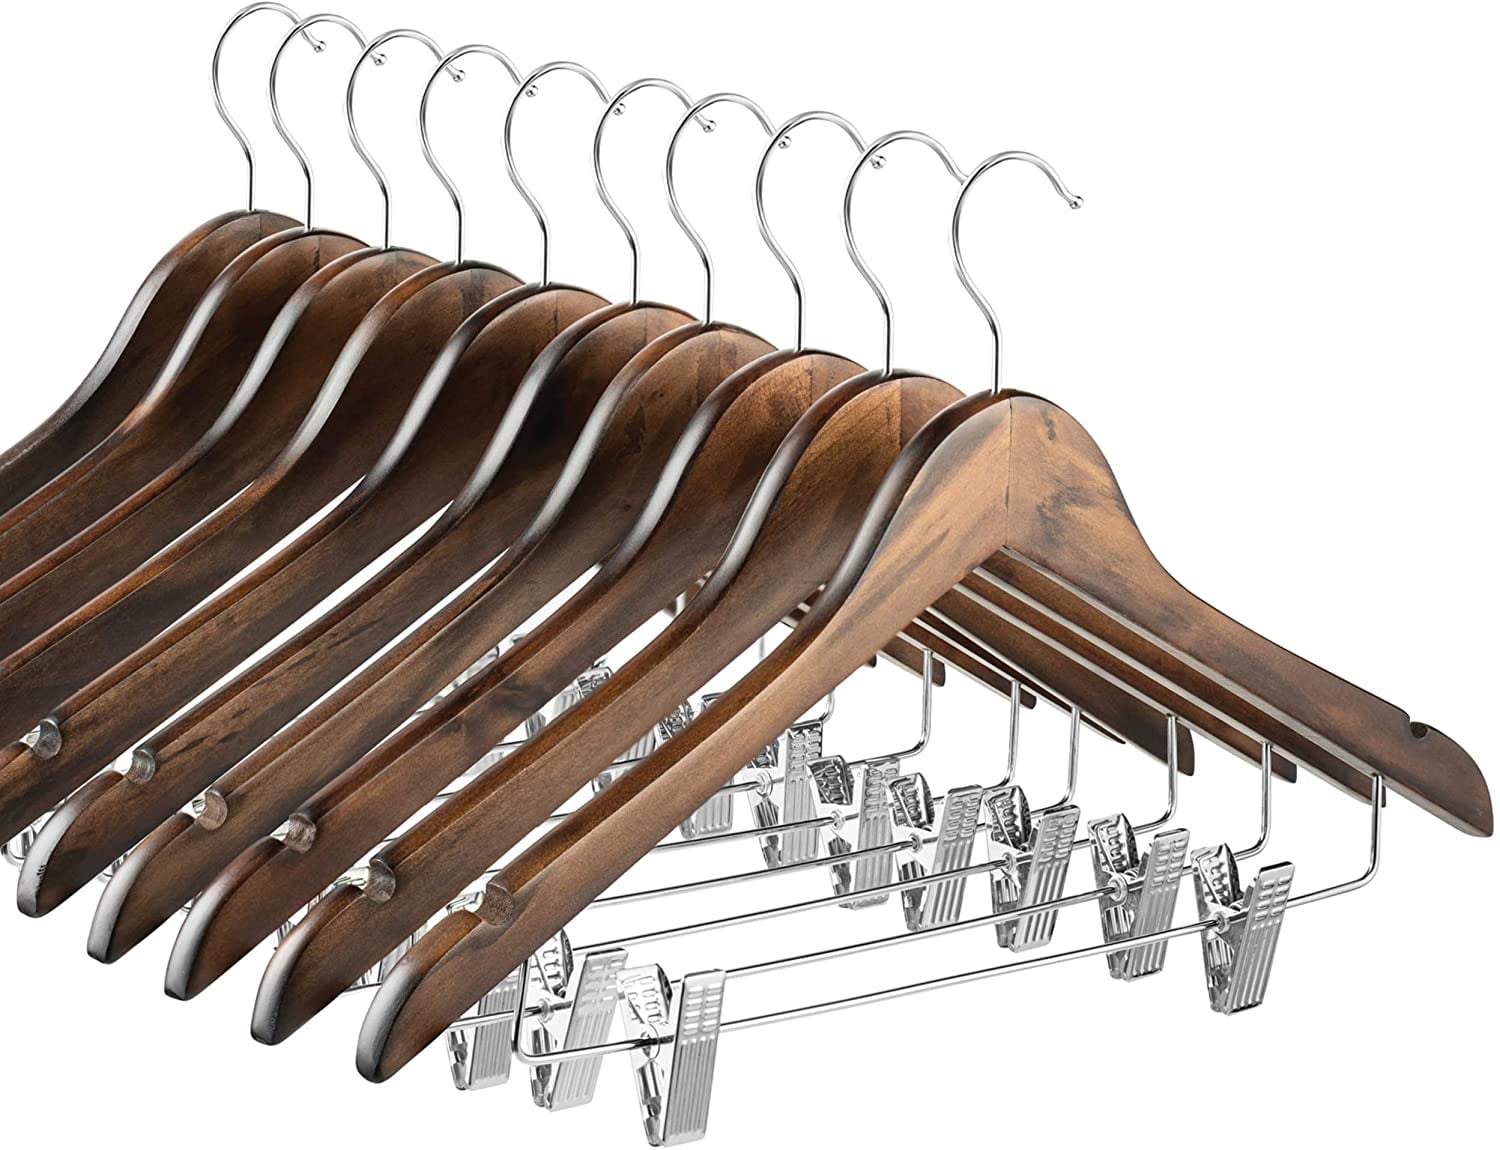 Shoulder Notches for Dress Coat 10 Pack 360° Swivel Hook Blouse Smooth Solid Wood Pants Hangers with Durable Adjustable Metal Clips High-Grade Wooden Suit Hangers Skirt Hangers with Clips Jacket 